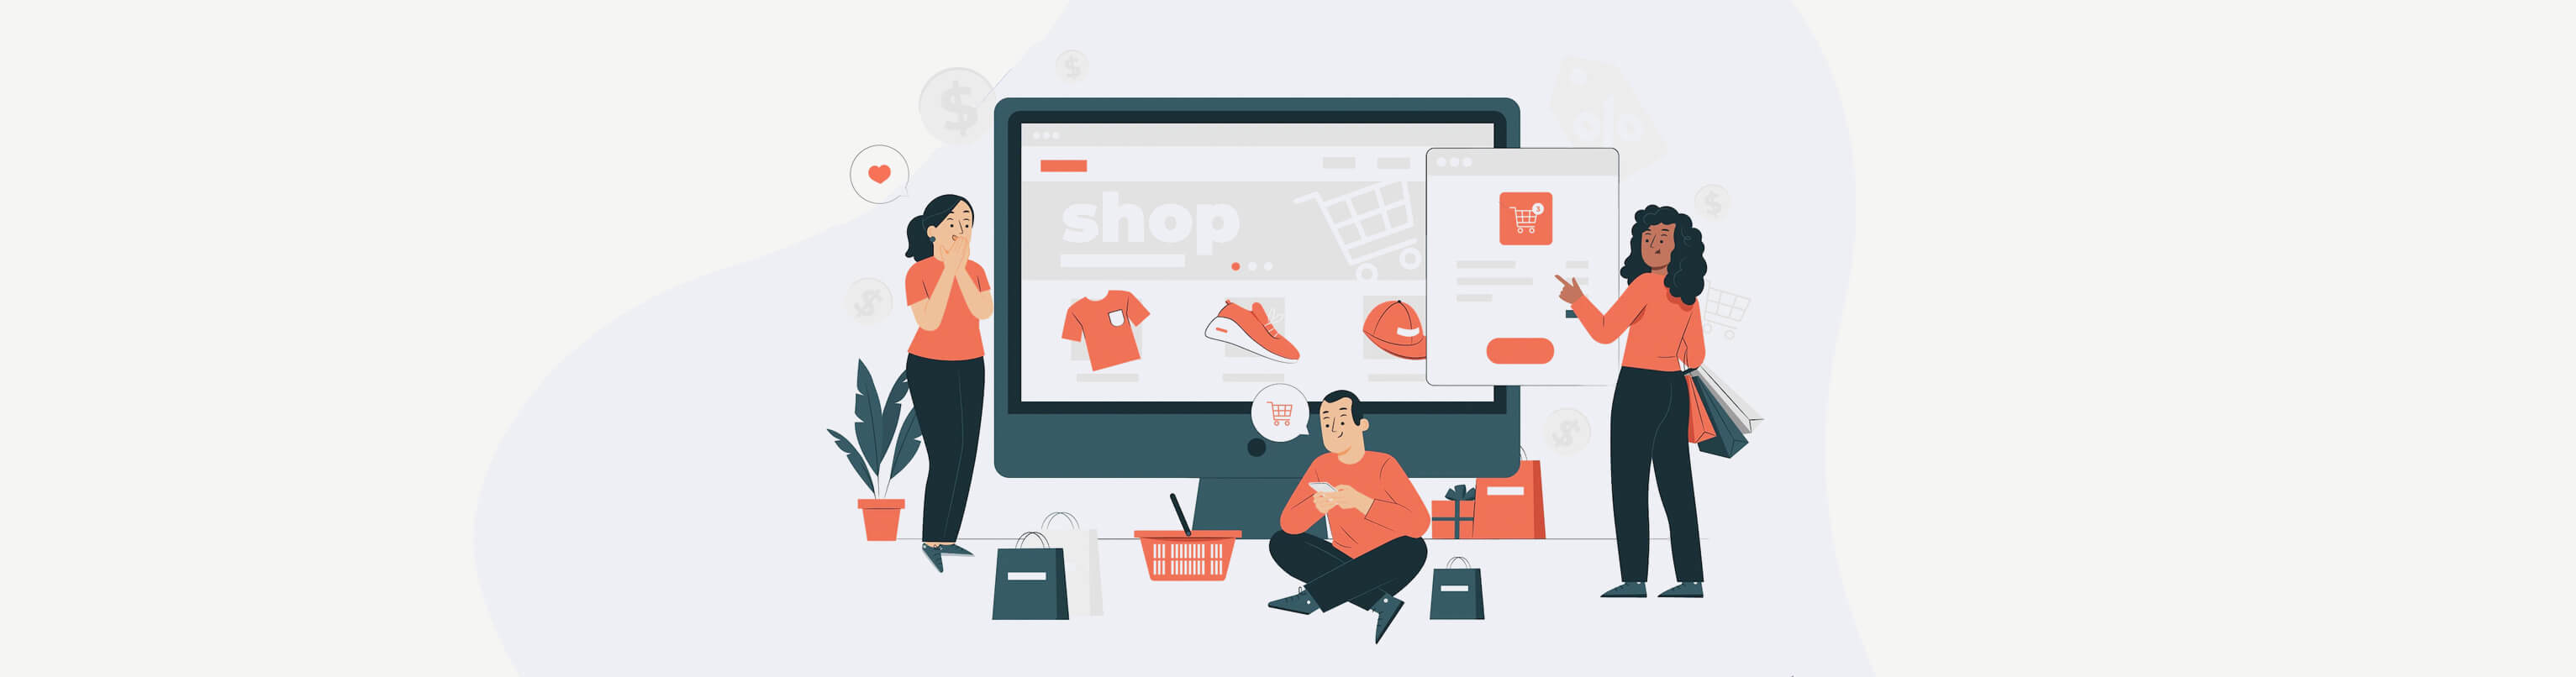 How To Design Shopify product landing page For eCommerce Stores